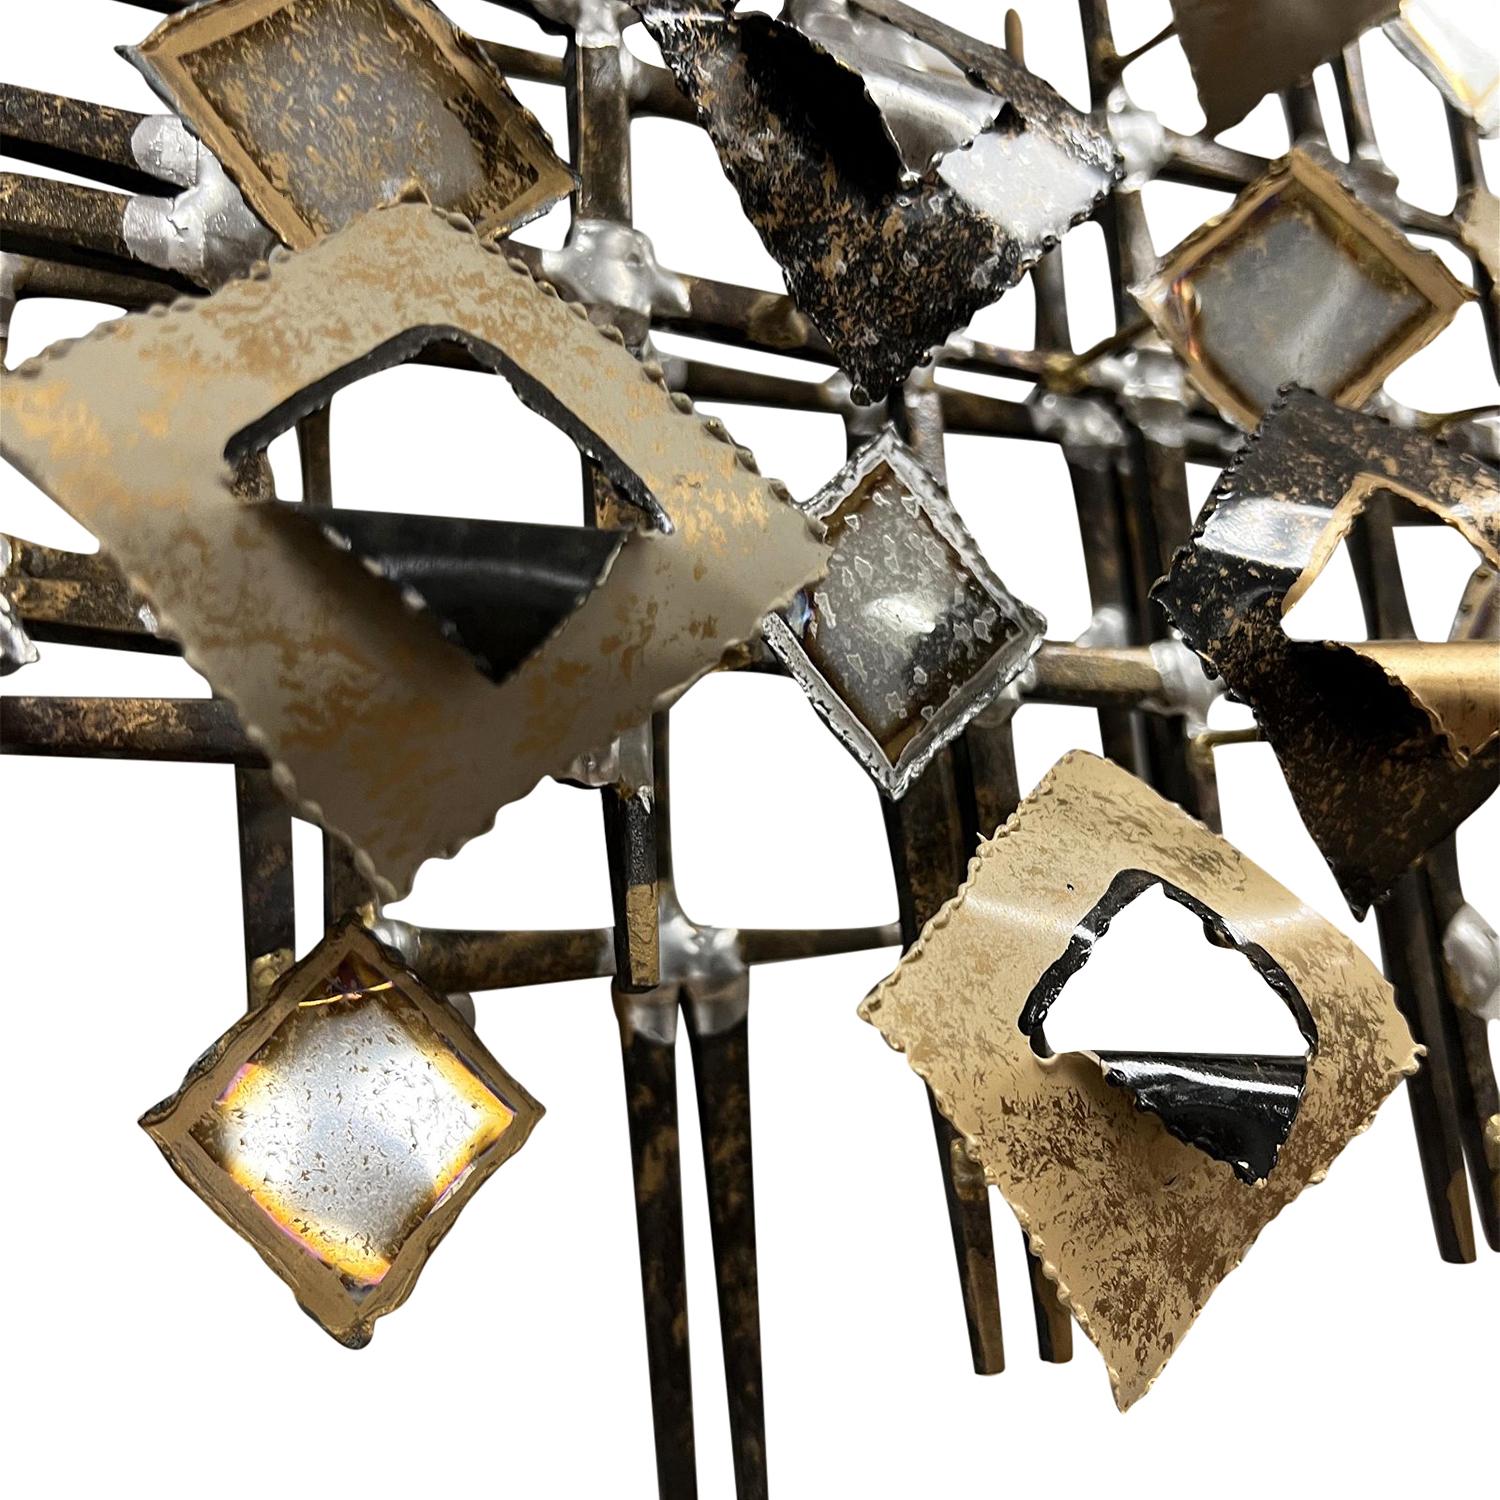 20th Century American Abstract Brutalist Metal Wall Sculpture by Linda Casetti For Sale 1